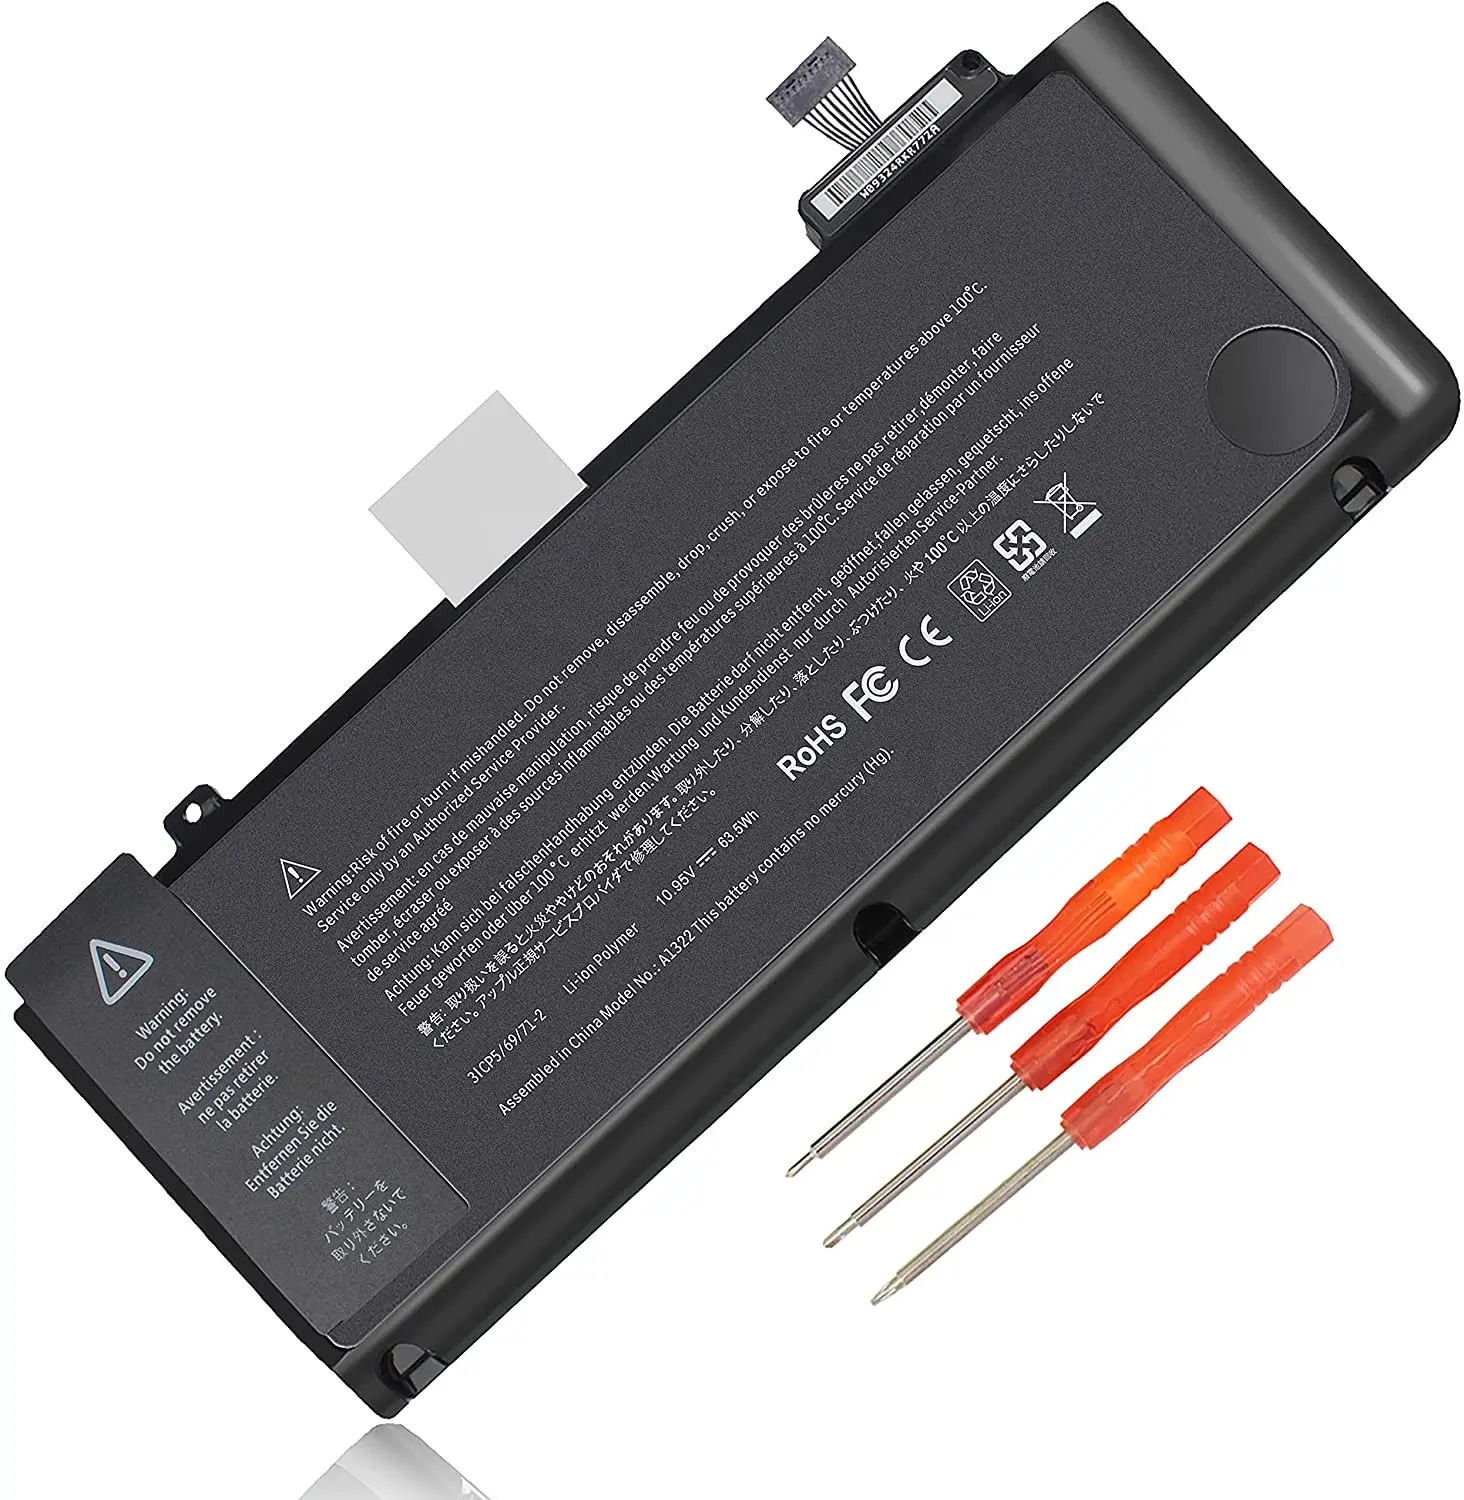 Laptop Battery A1322 63.5Wh 10.95V for Mac book pro 13" A1278 2009 Version MB990LL Rechargeable